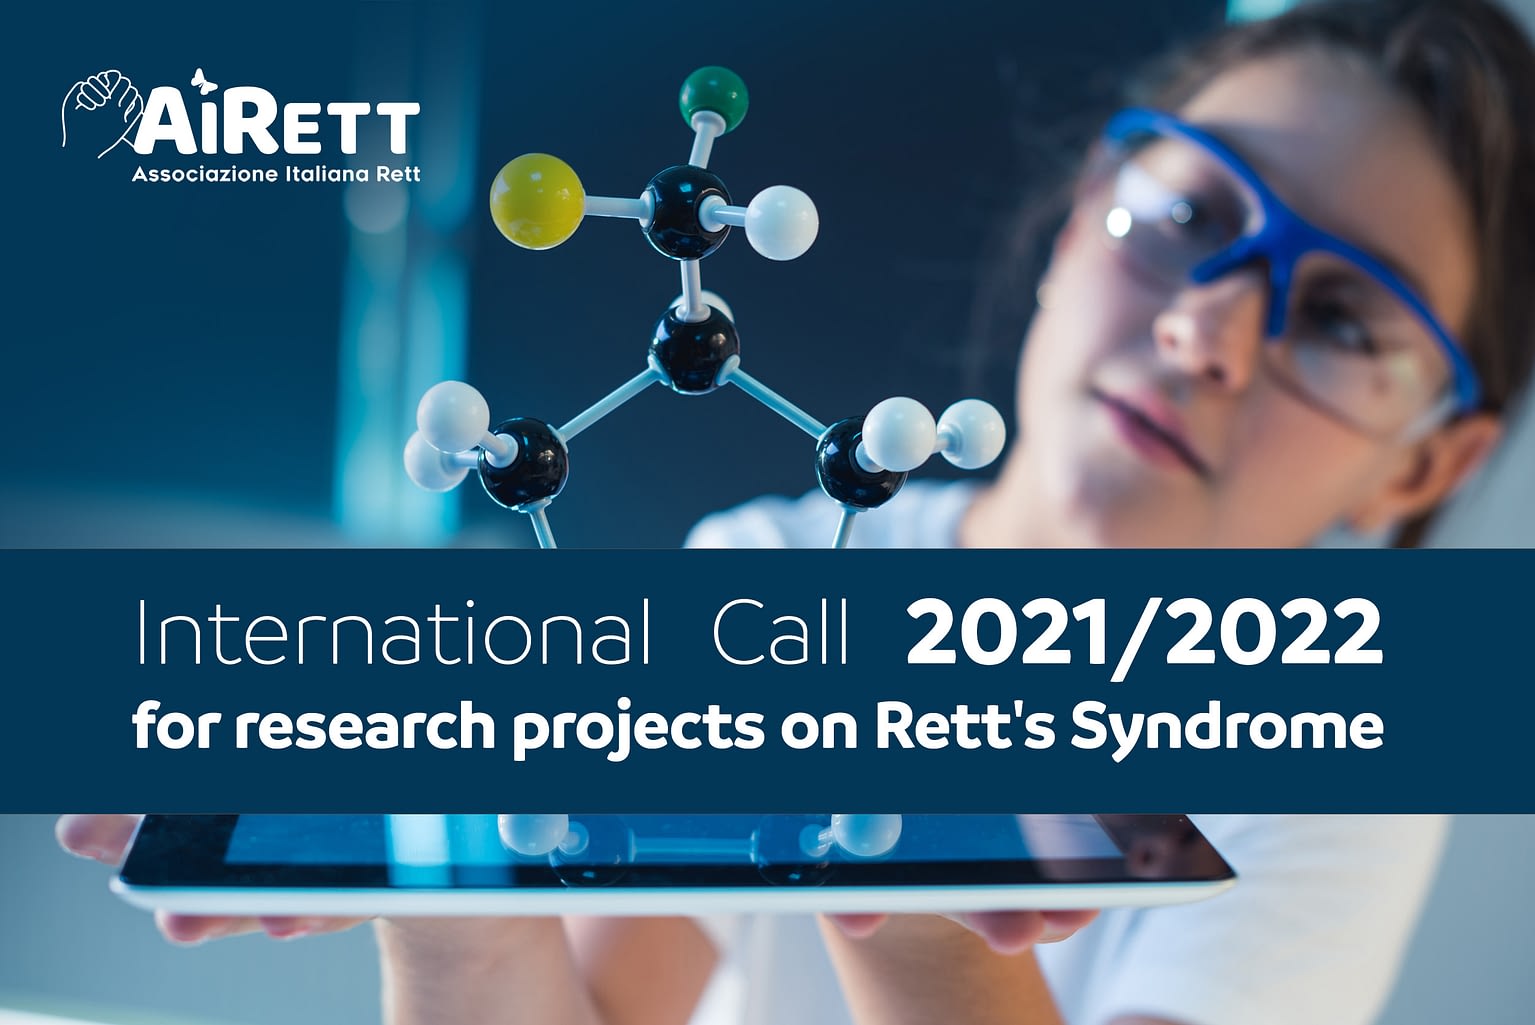 AIRETT International Call for Research Projects